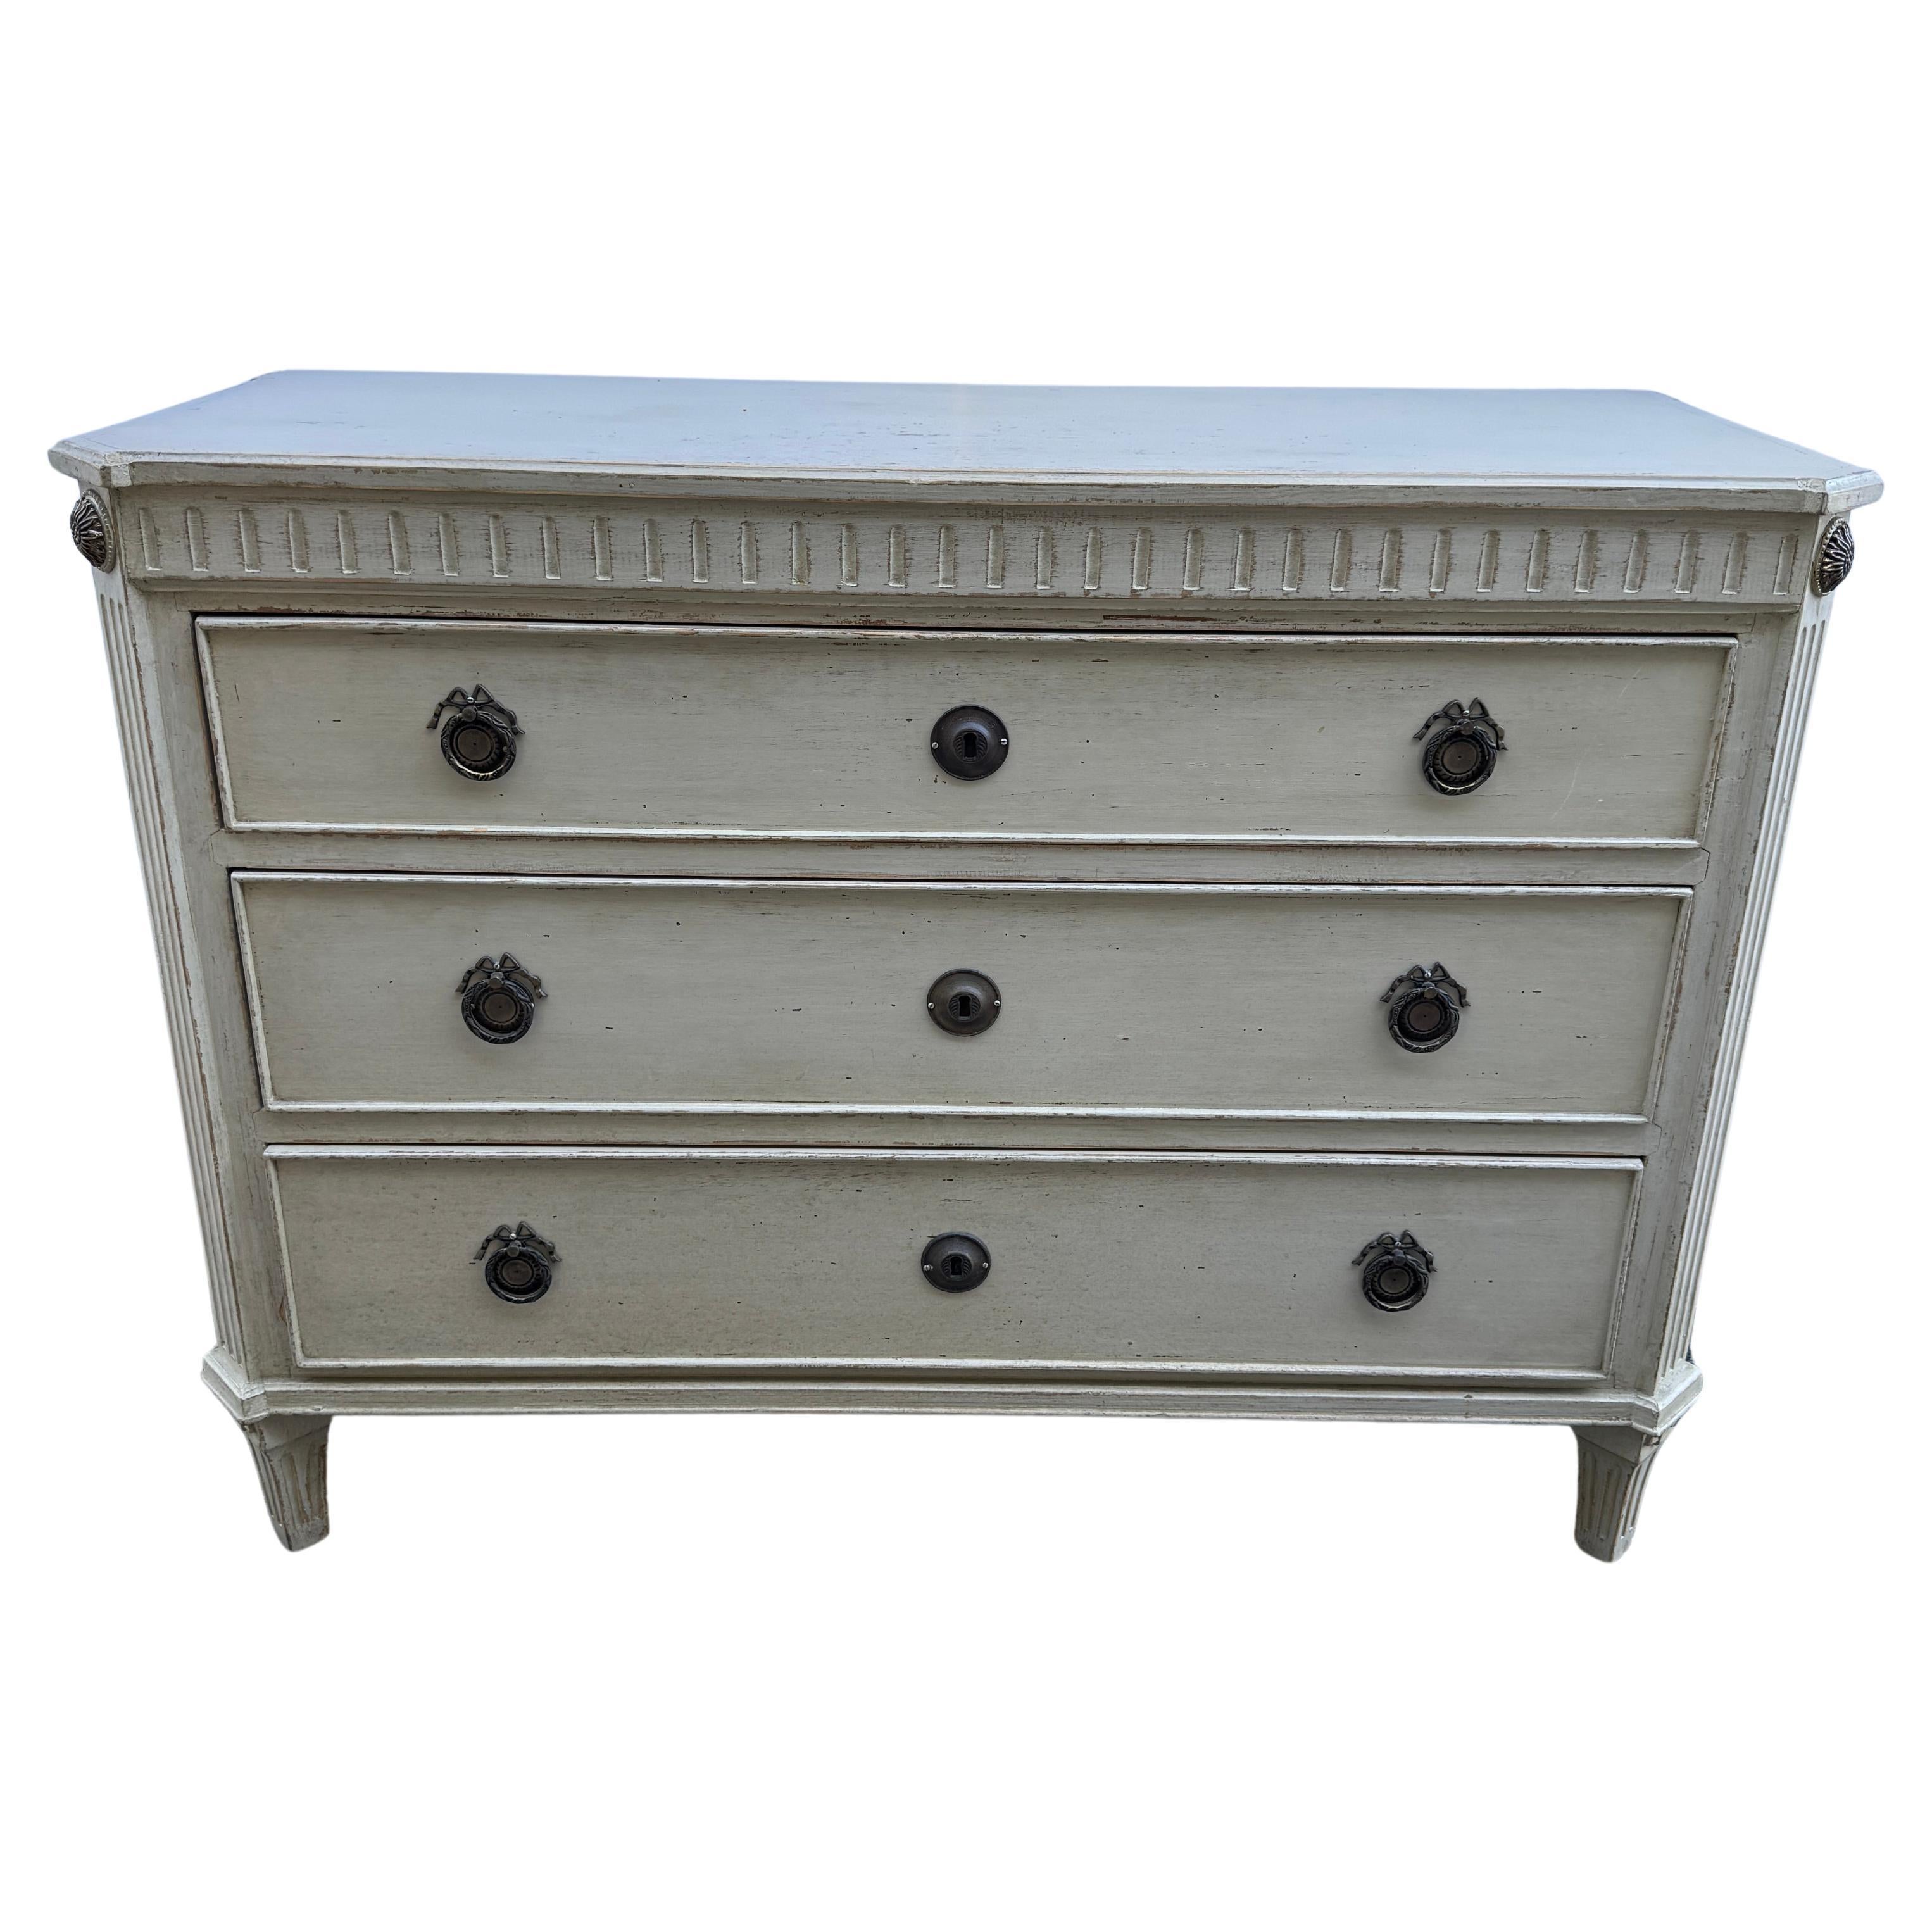 Swedish Gustavian Painted Commode with Fluted Carvings 